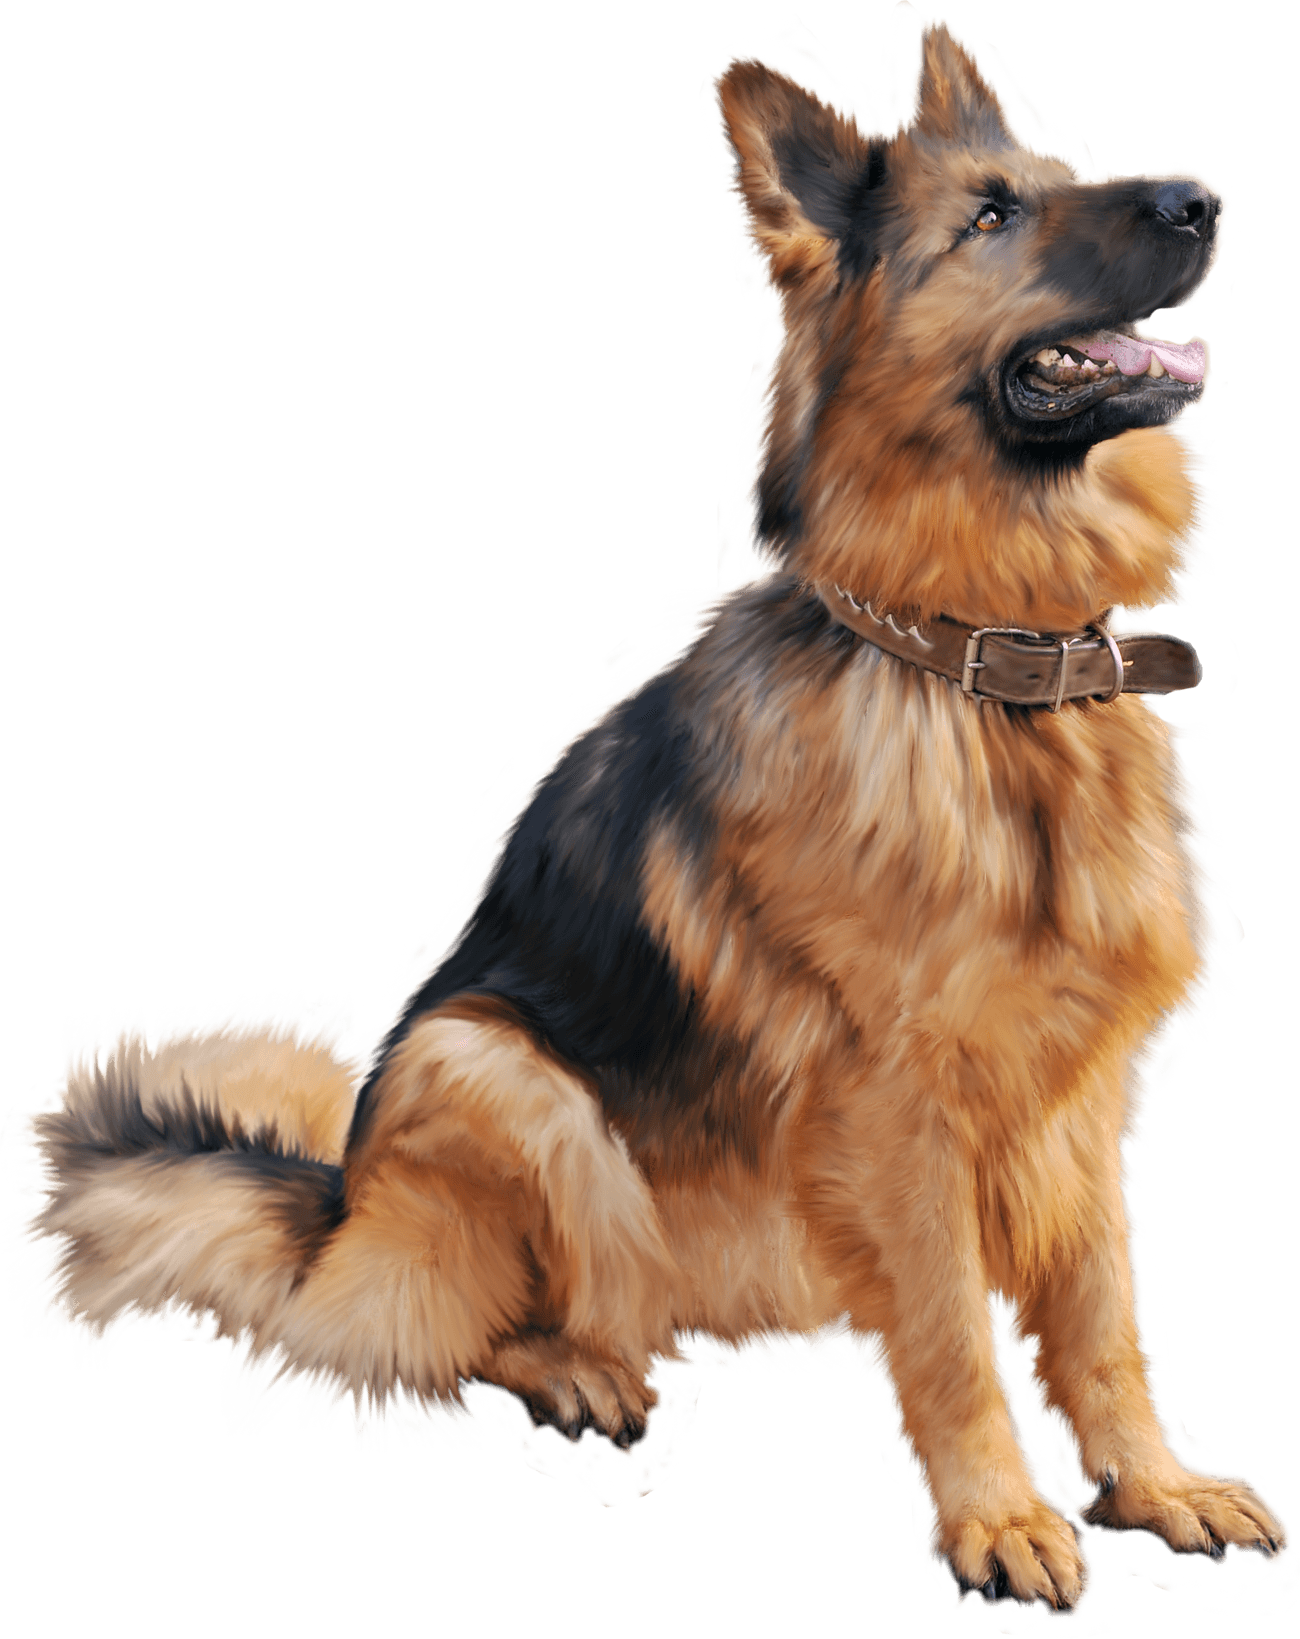 Download Dog Png Image Picture Download Dogs HQ PNG Image ...